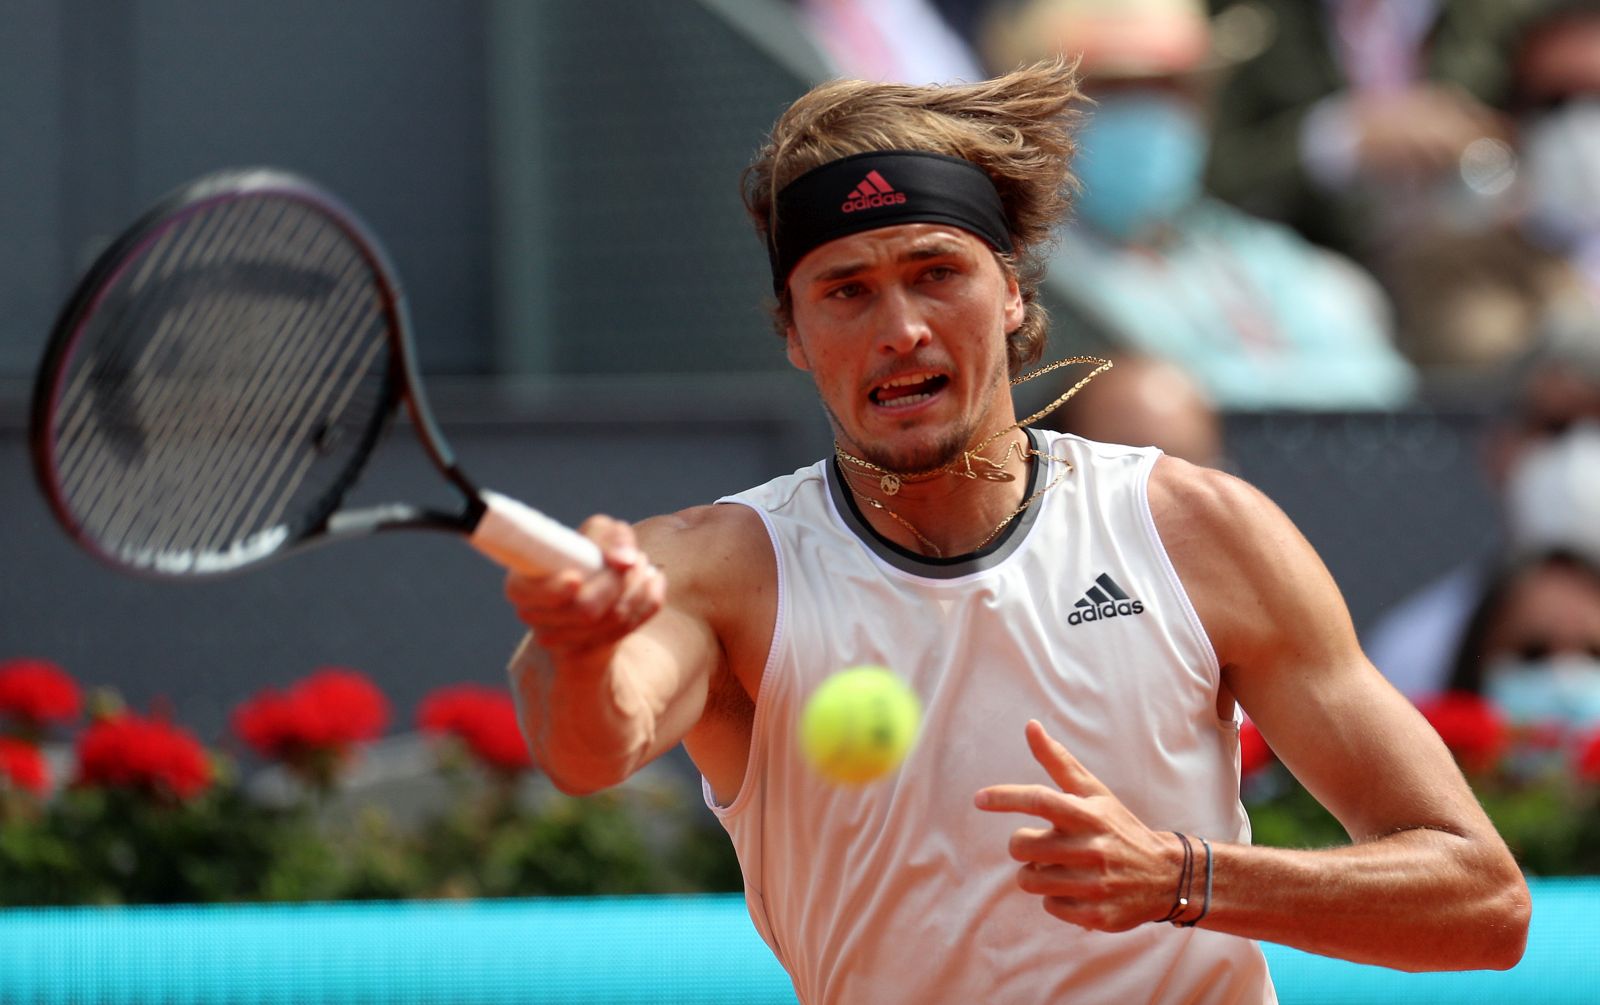 epa09185380 Alexander Zverev of Germany in action against Dominic Thiem of Austria during their semi final match at the Mutua Madrid Open tennis tournament in Madrid, Spain, 08 May 2021.  EPA/CHEMA MOYA